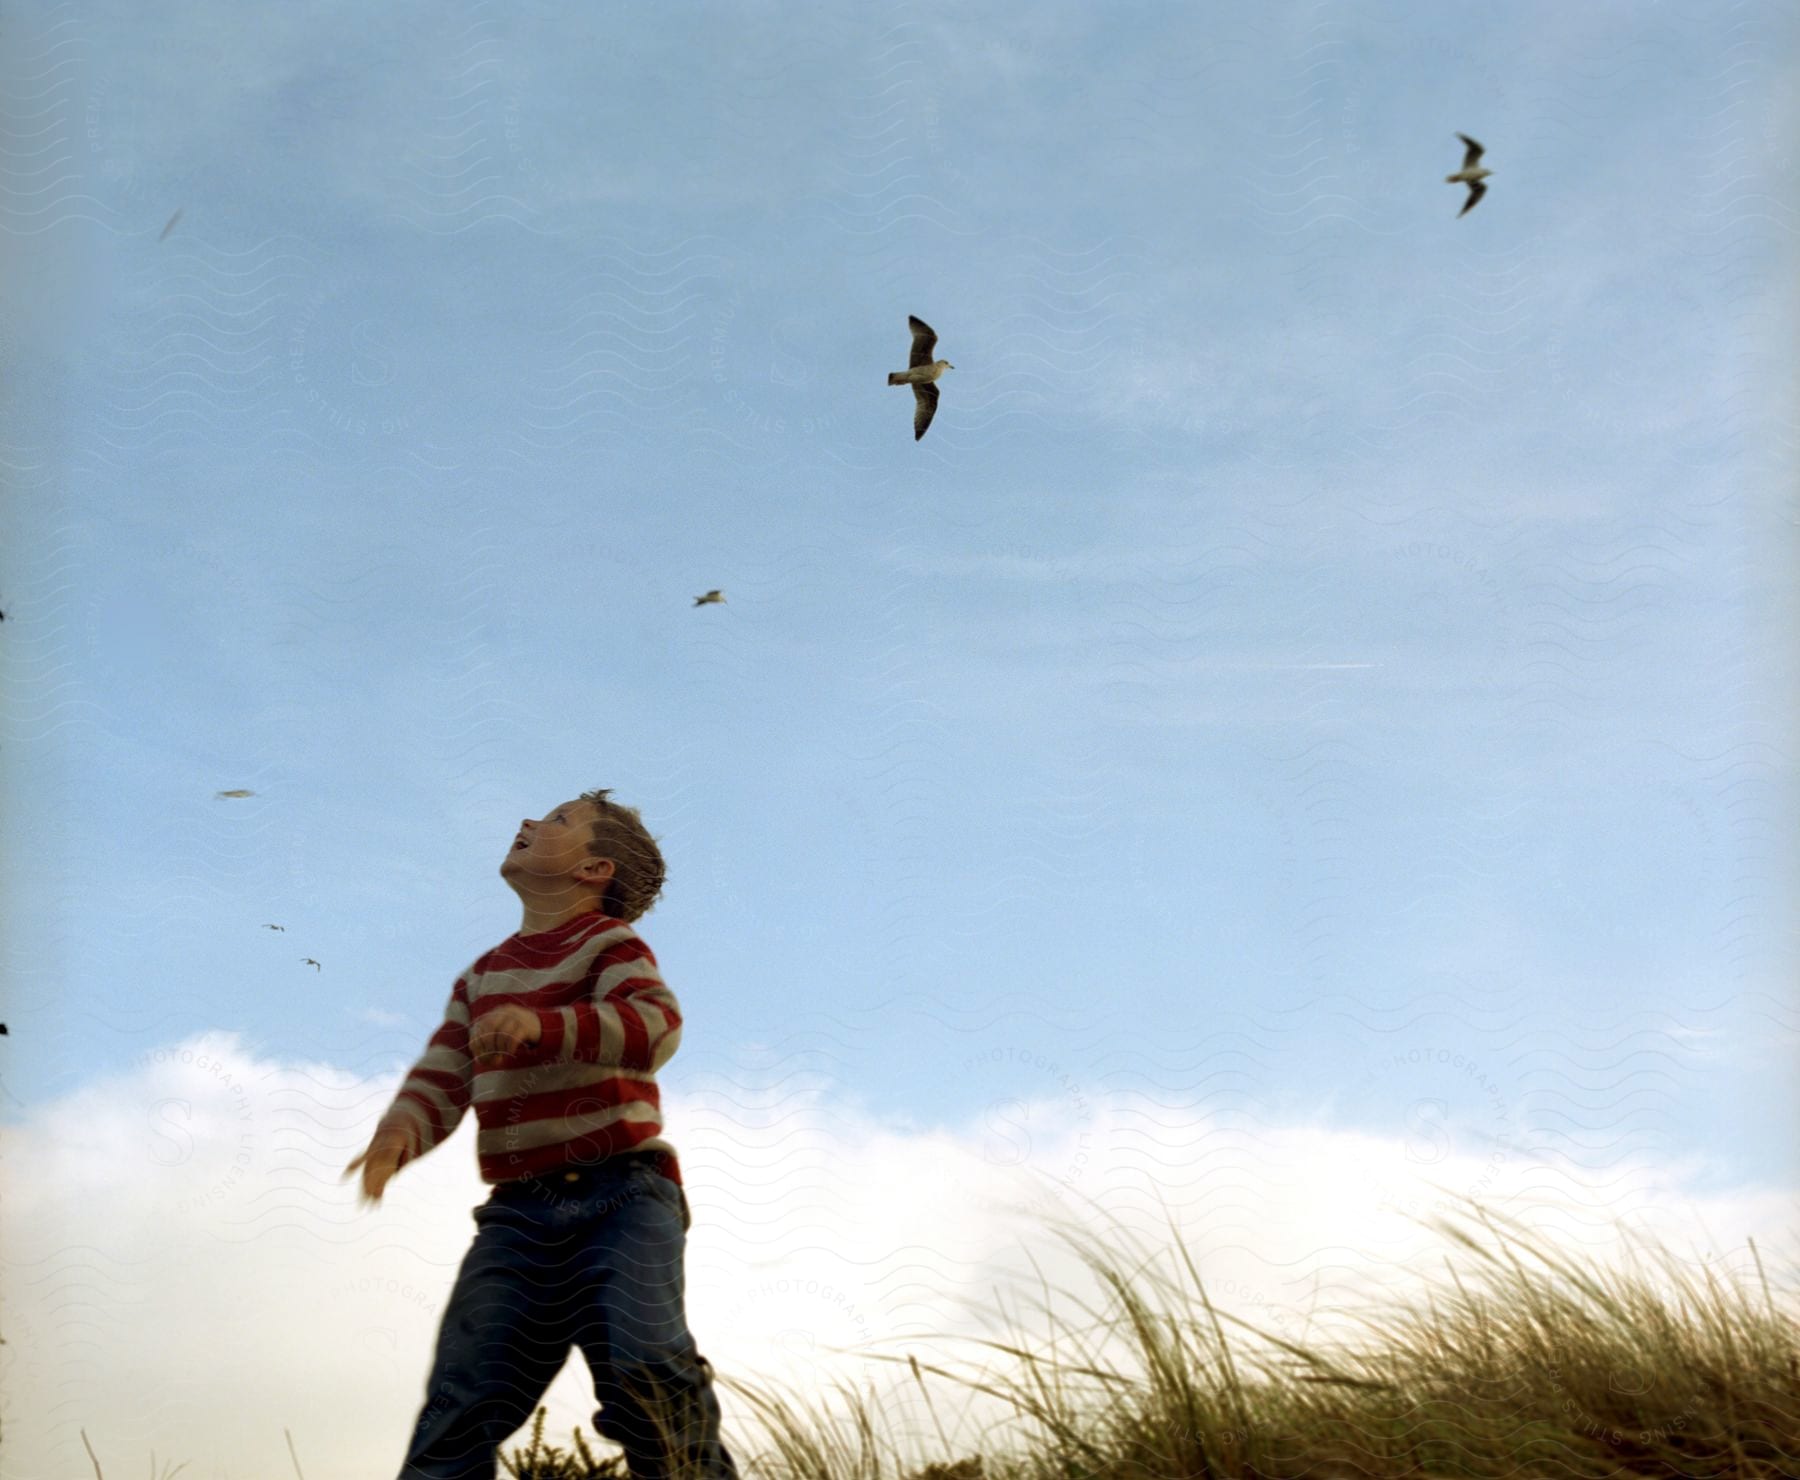 A child stands on a grassy hill looking up at the sky as birds fly overhead